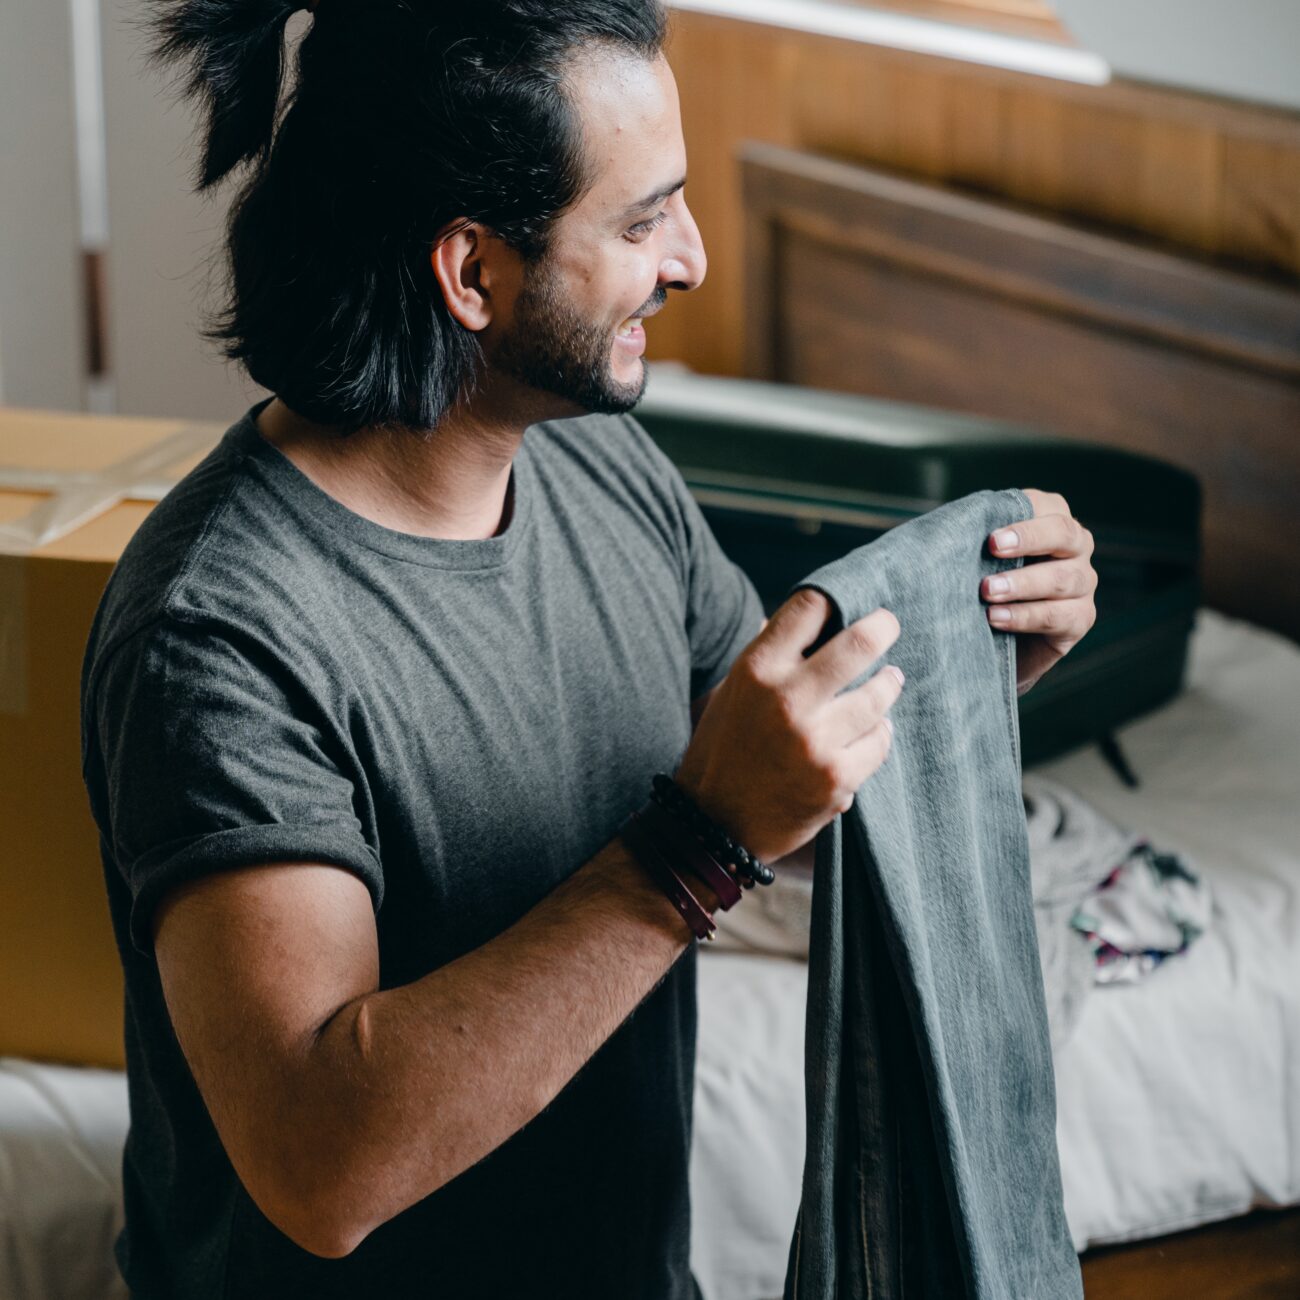 A man smiling while looking at a pair of jeans, while unpacking, in a cozy bedroom setting.